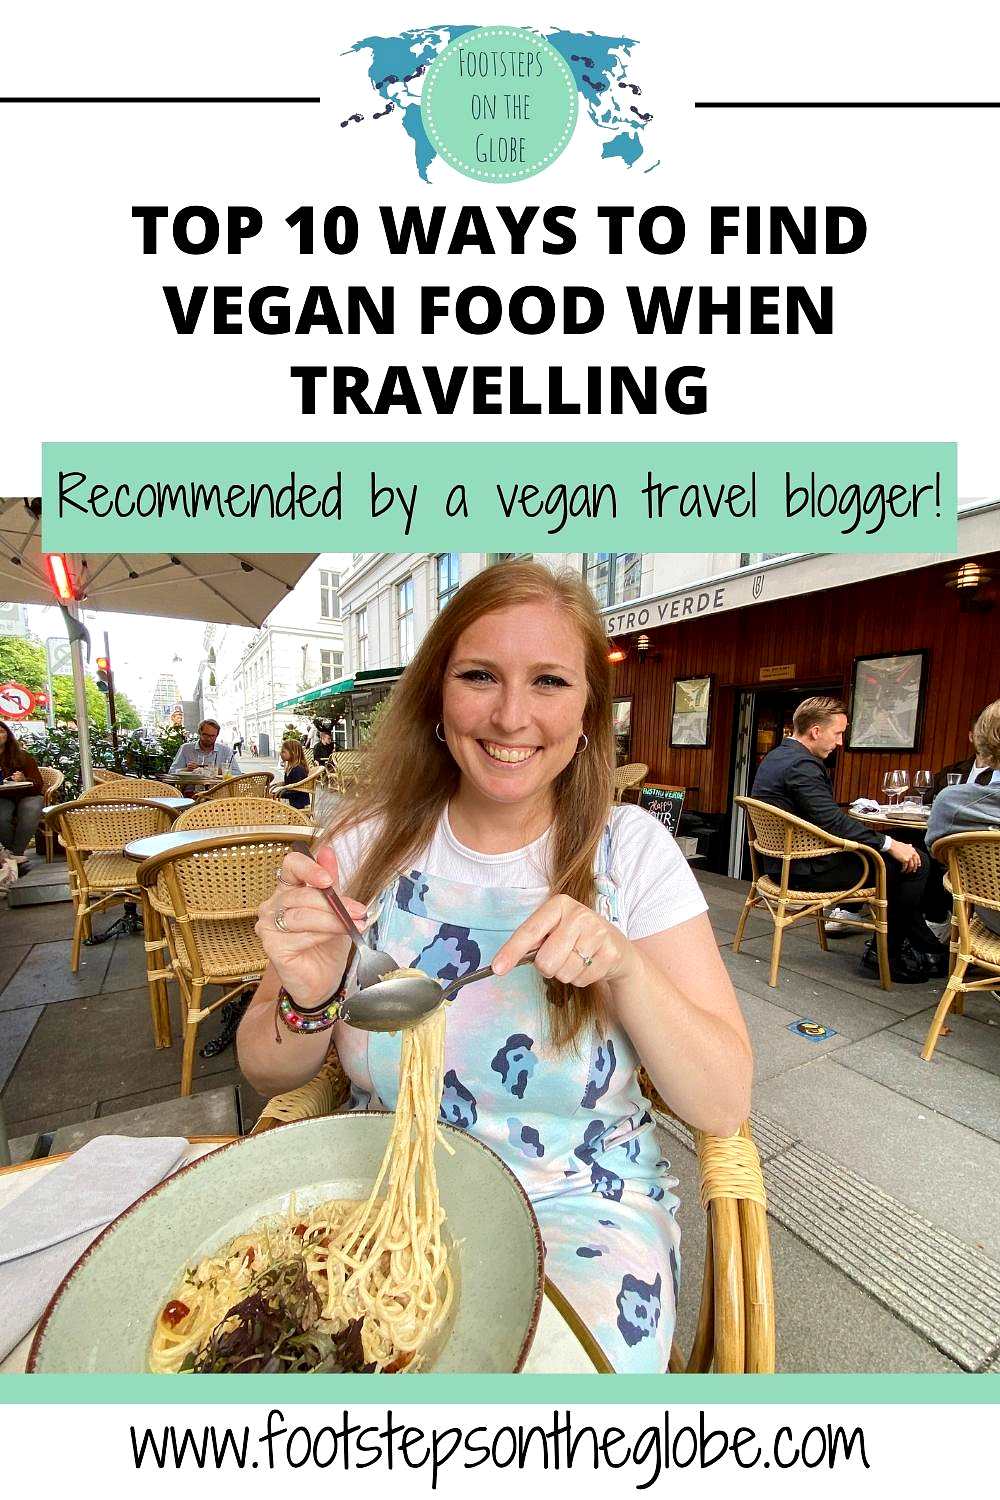 Pinterest image of Mel pulling spaghetti from her plate and smiling in an outdoor vegan restaurant in Copenhagen with the text: "Top 10 ways to find vegan food when travelling - recommended by a vegan travel blogger!"